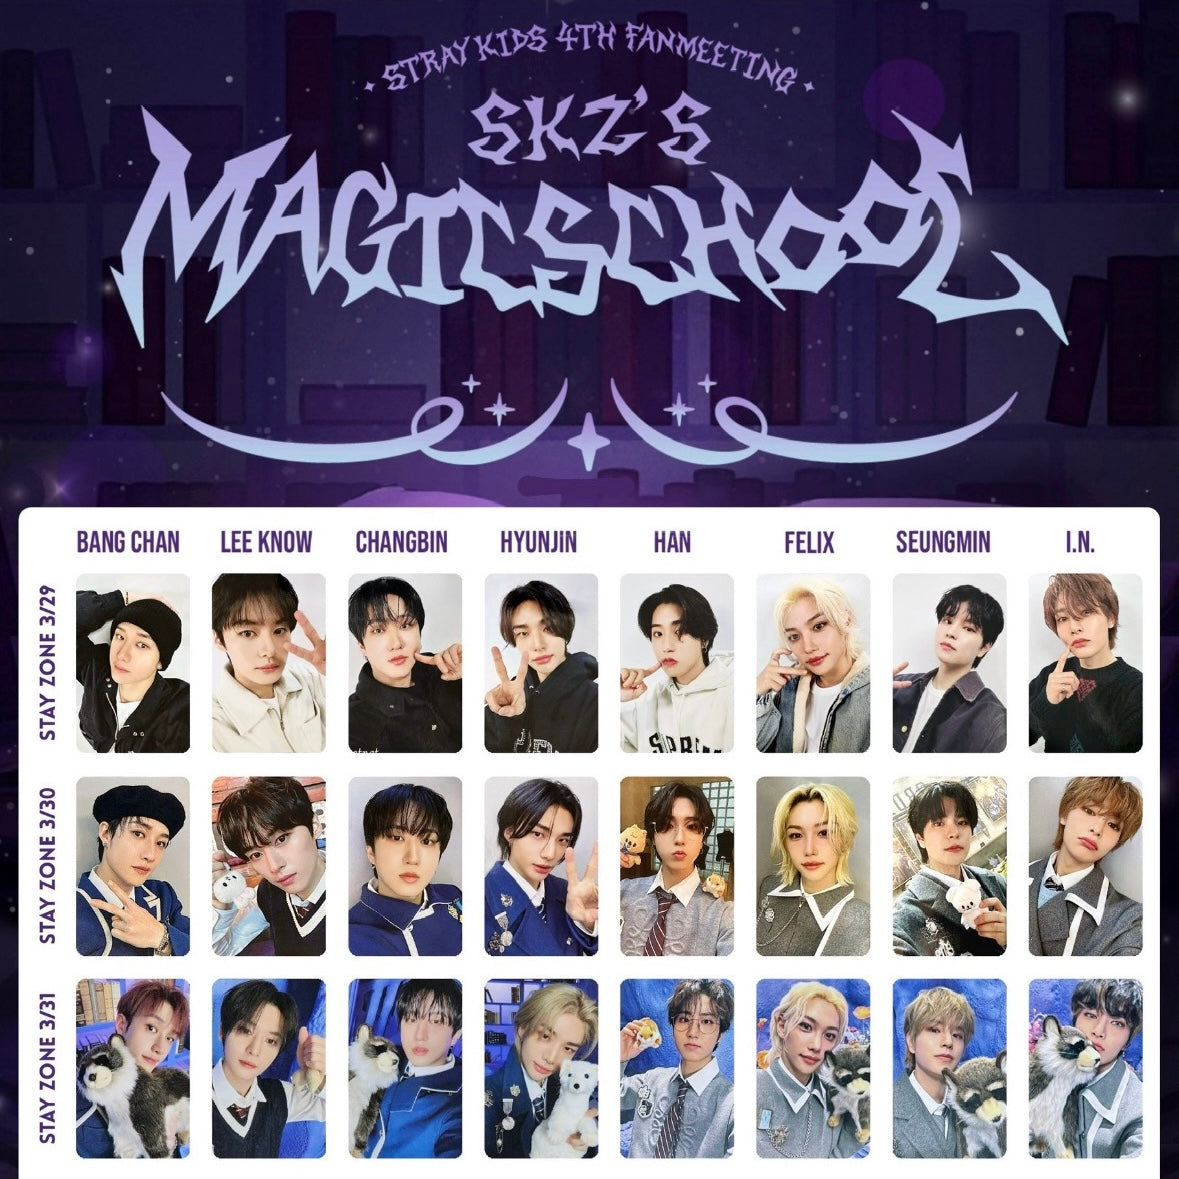 ON HAND] Stray Kids Magic School Fanmeeting STAY ZONE Photocard 